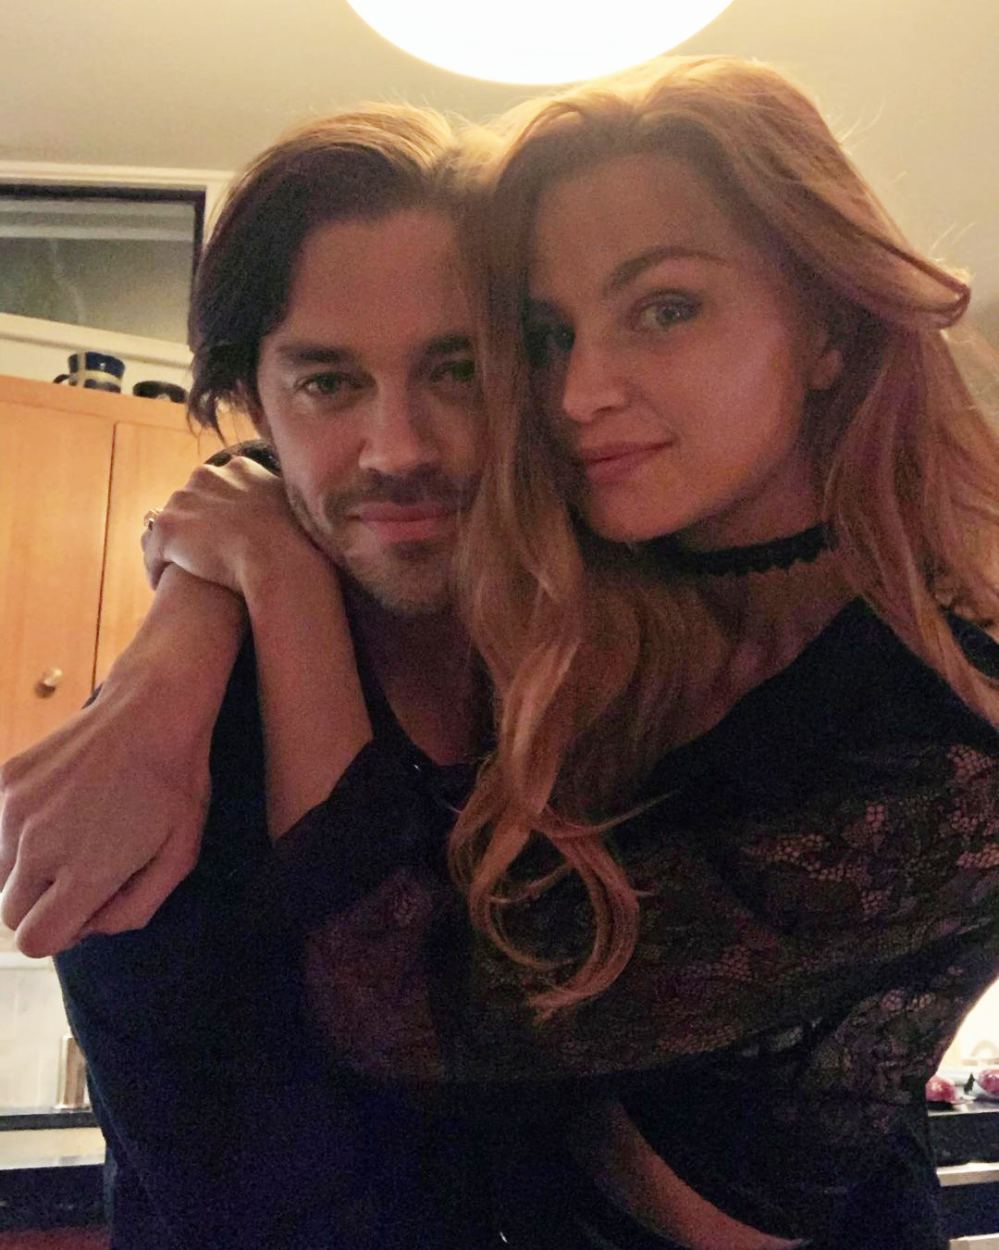 Prodigal Son's Tom Payne Reveals He Married Jennifer Akerman in Front of Their Fireplace